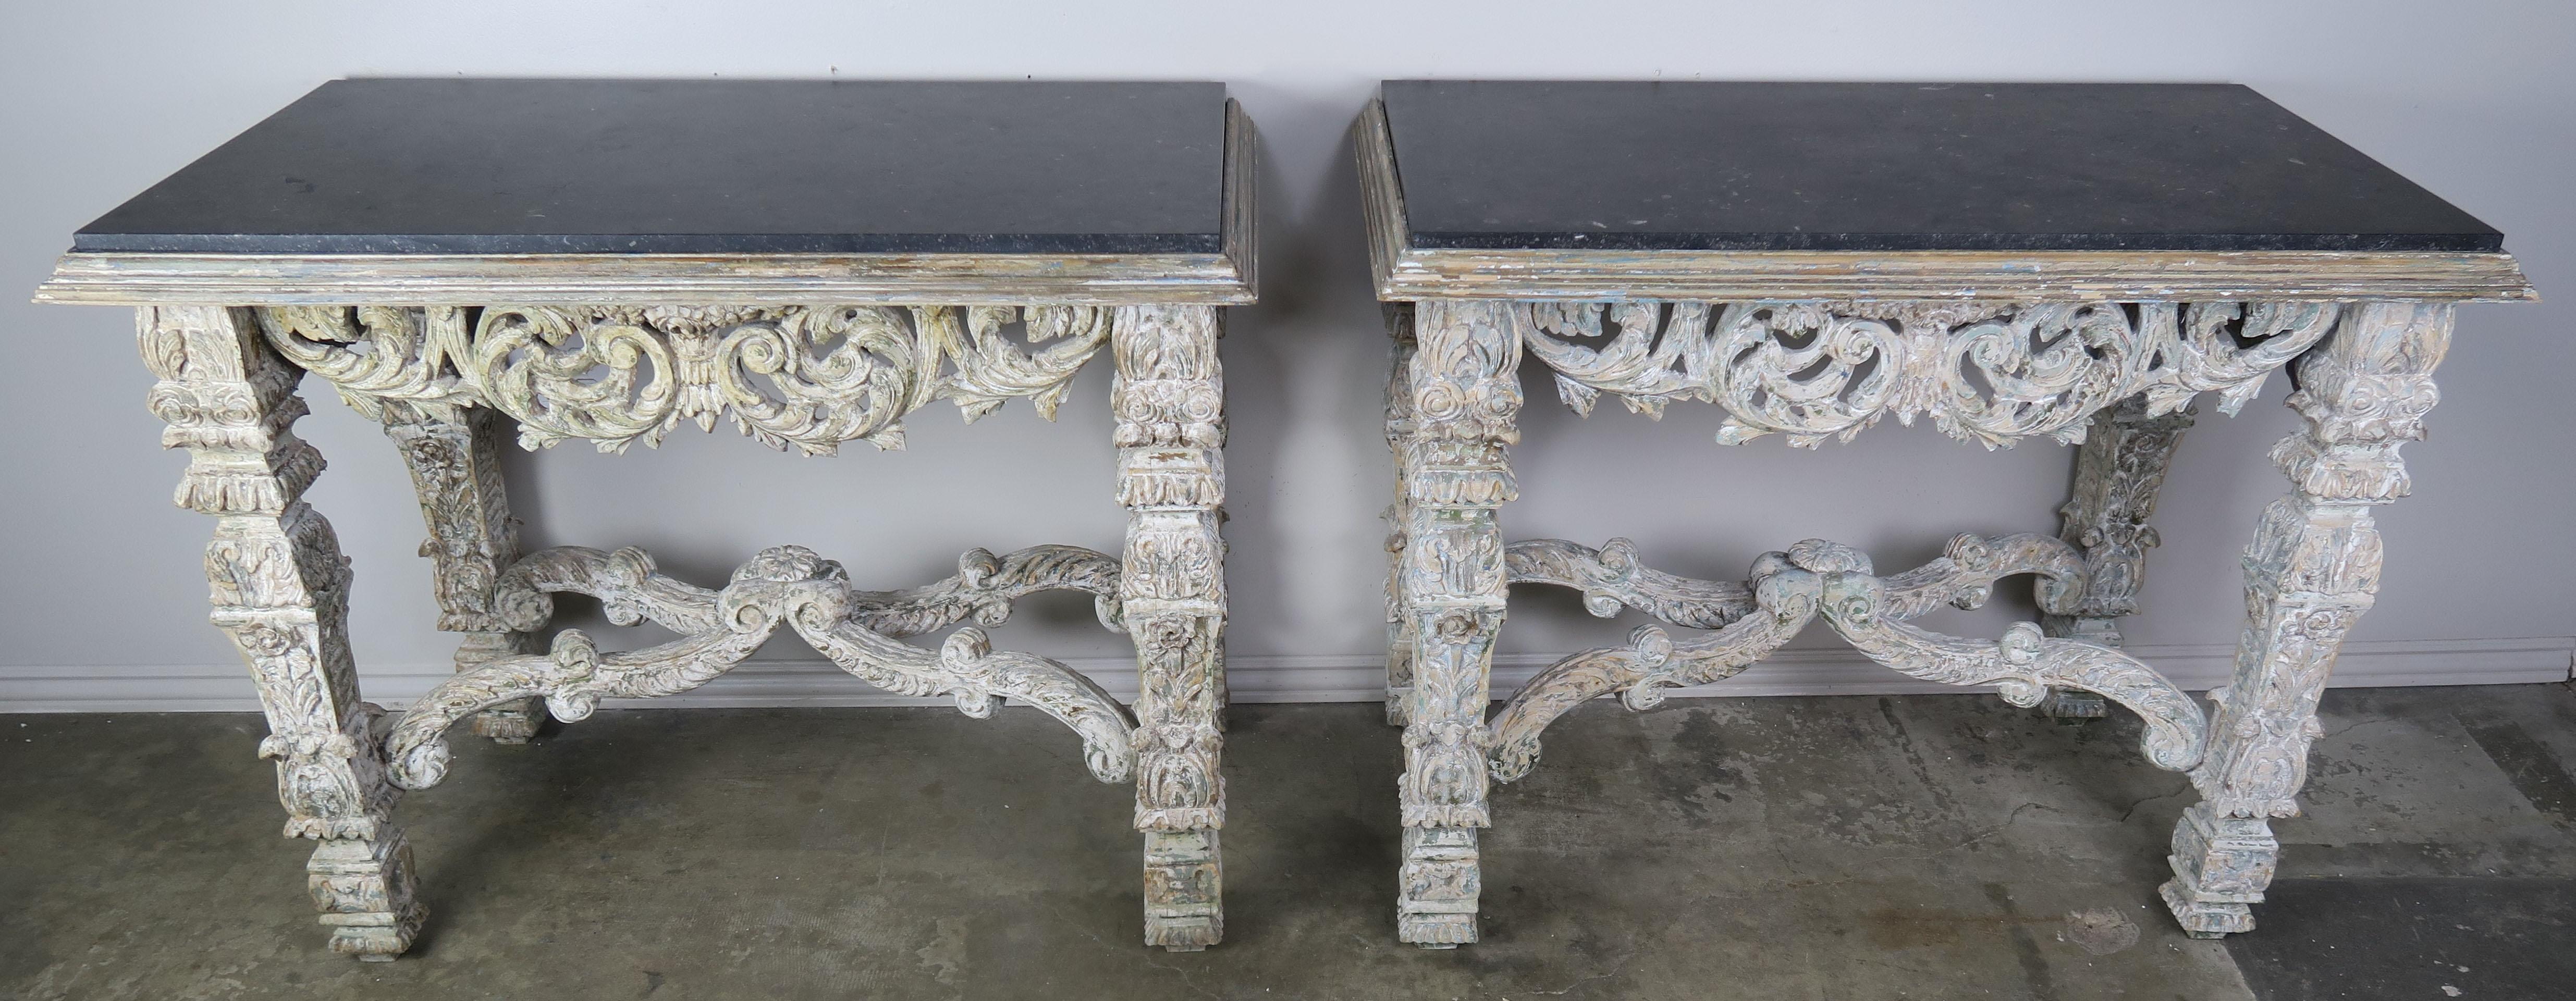 Italian Painted Consoles with Black Marble Tops, Pair 4